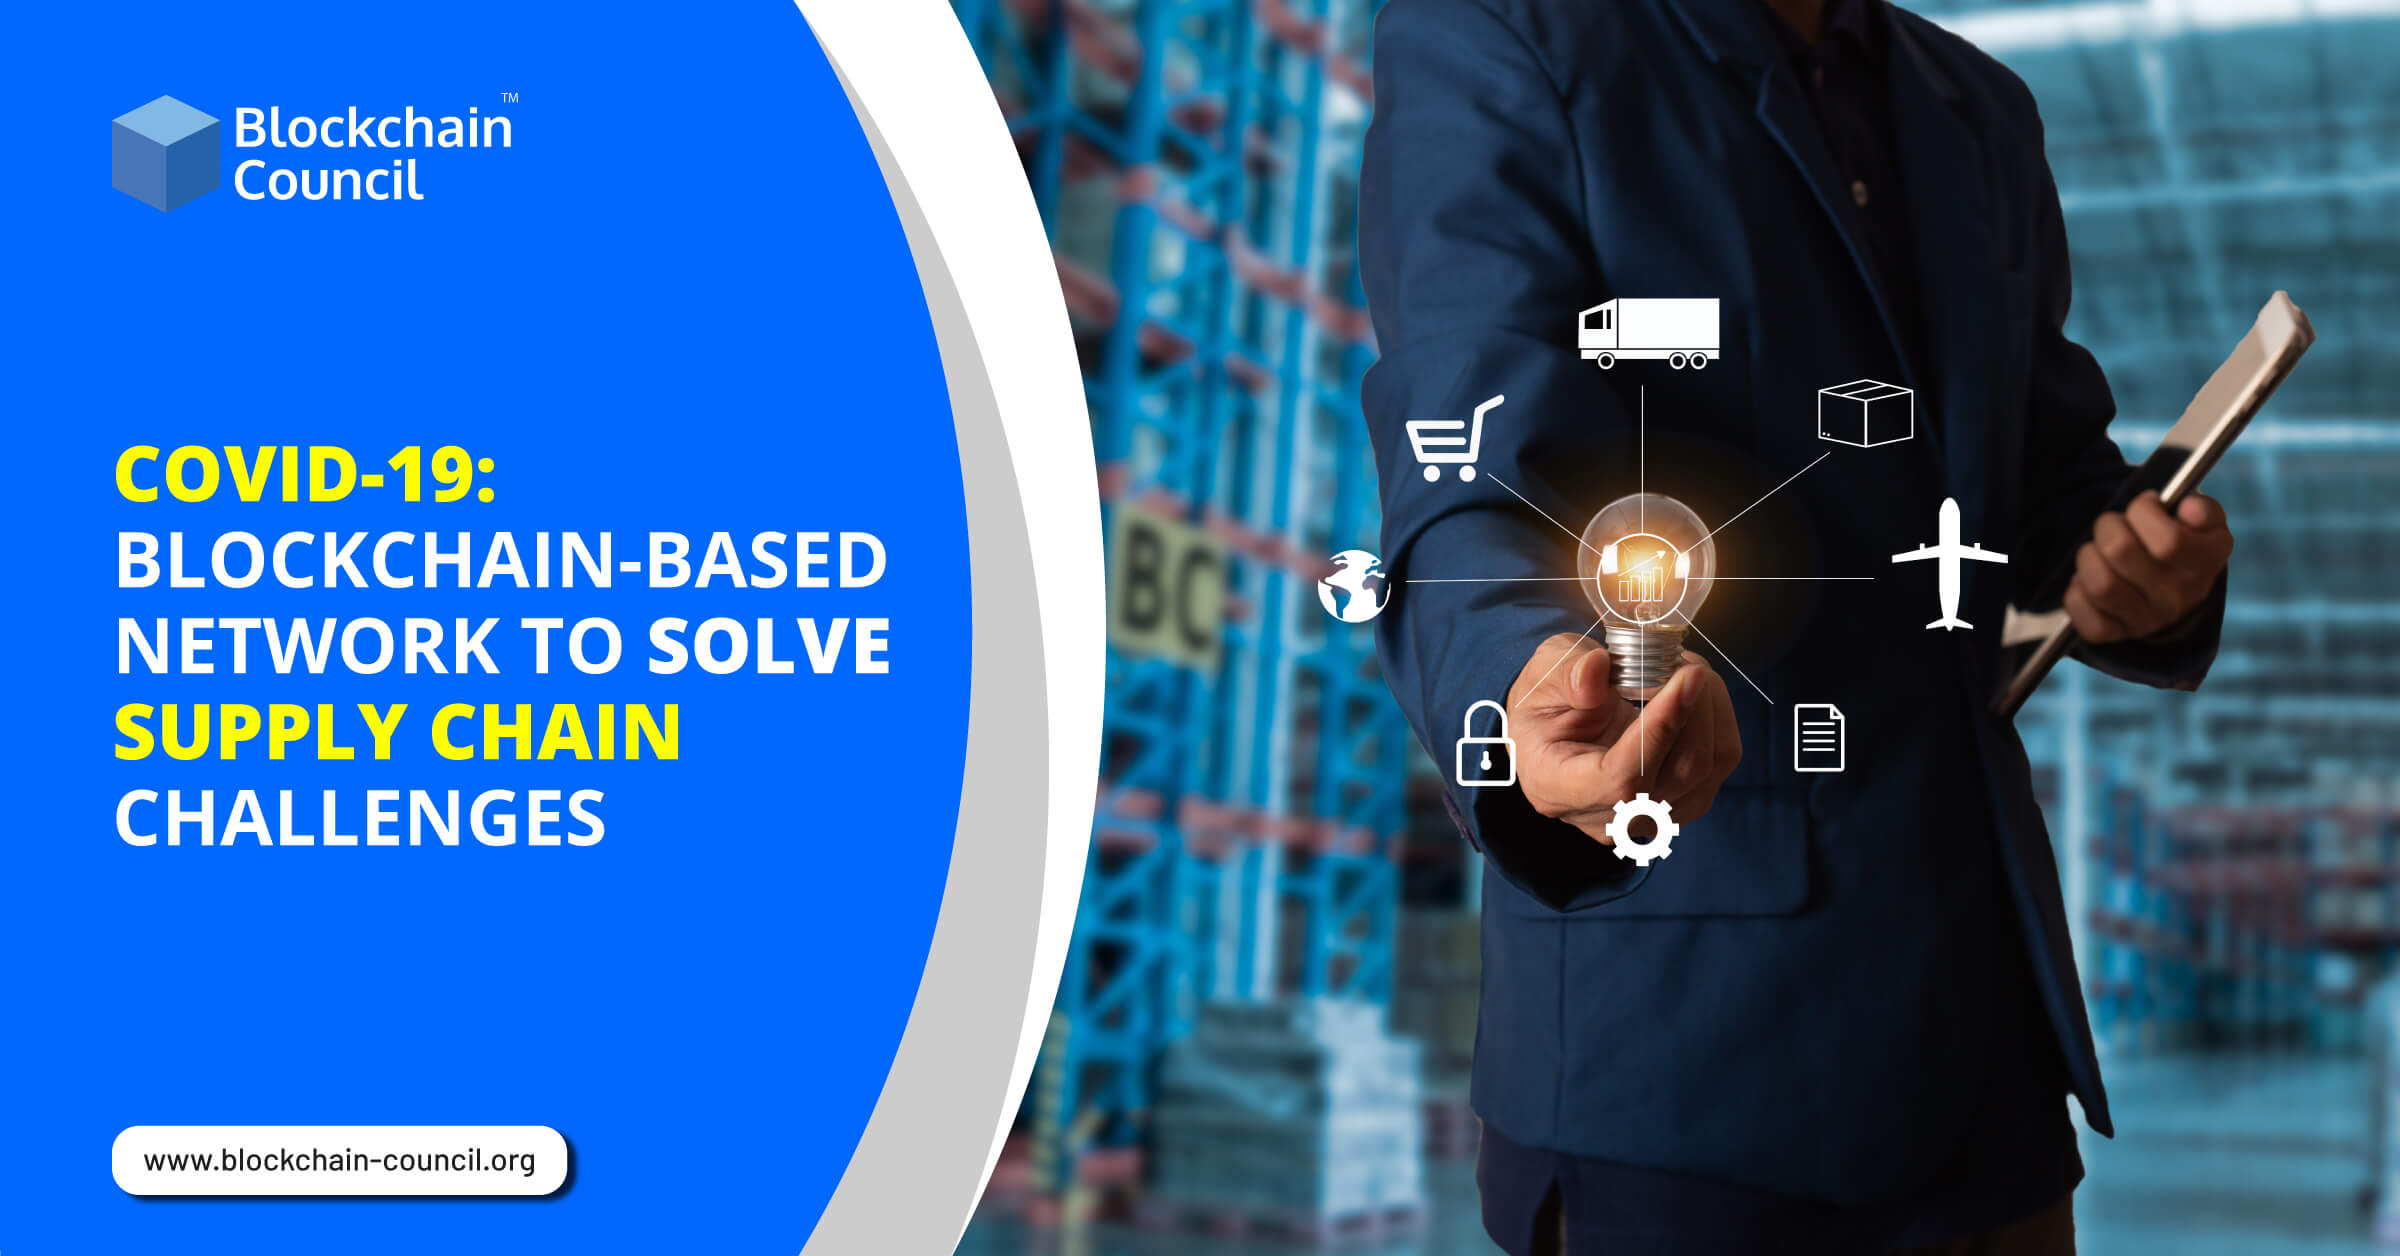 COVID-19: Blockchain-Based Network to Solve Supply Chain Challenges